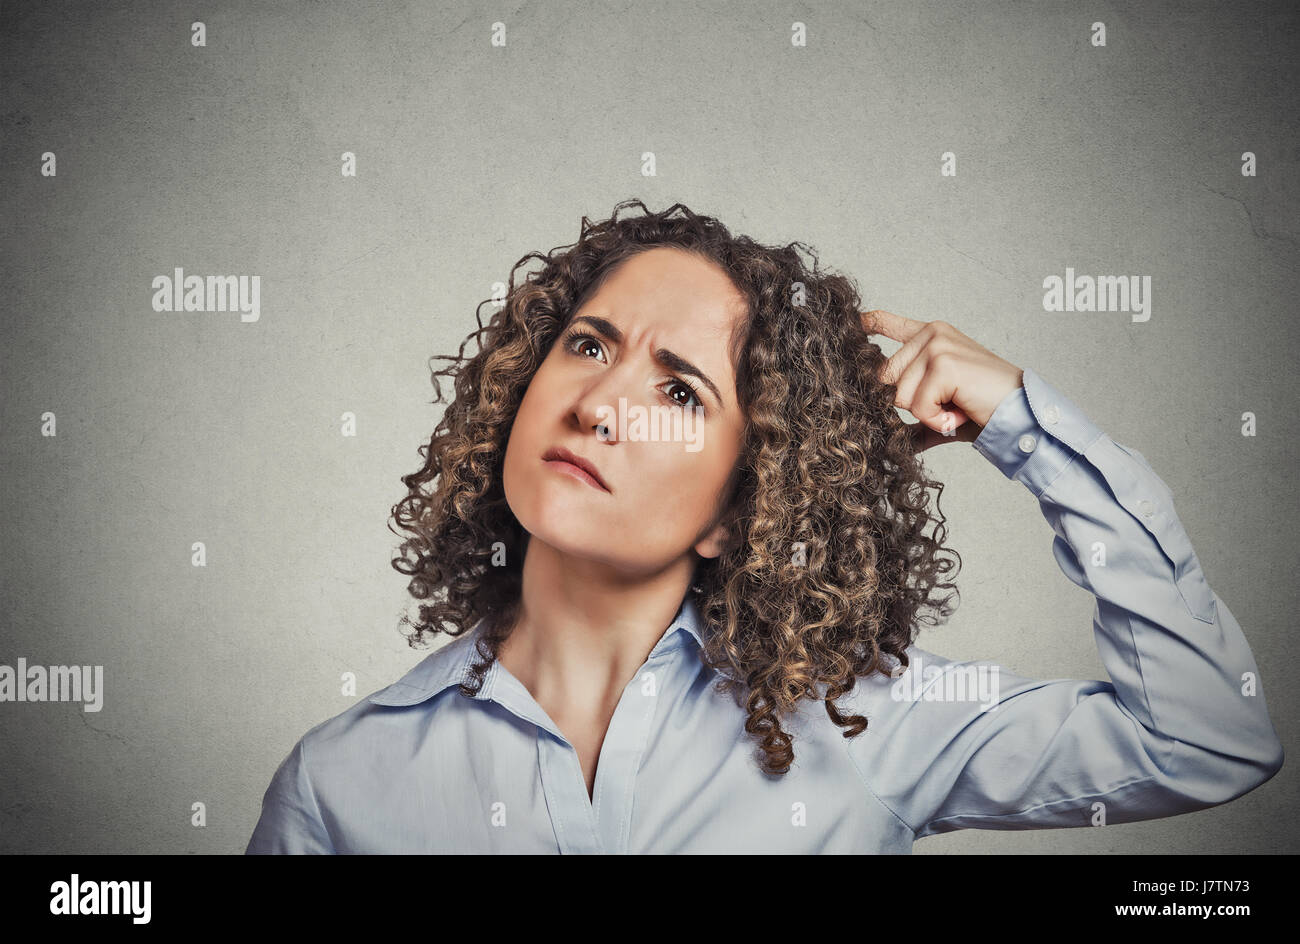 Closeup portrait young woman scratching head, thinking daydreaming about something wondering looking up isolated on grey wall background. Human facial Stock Photo